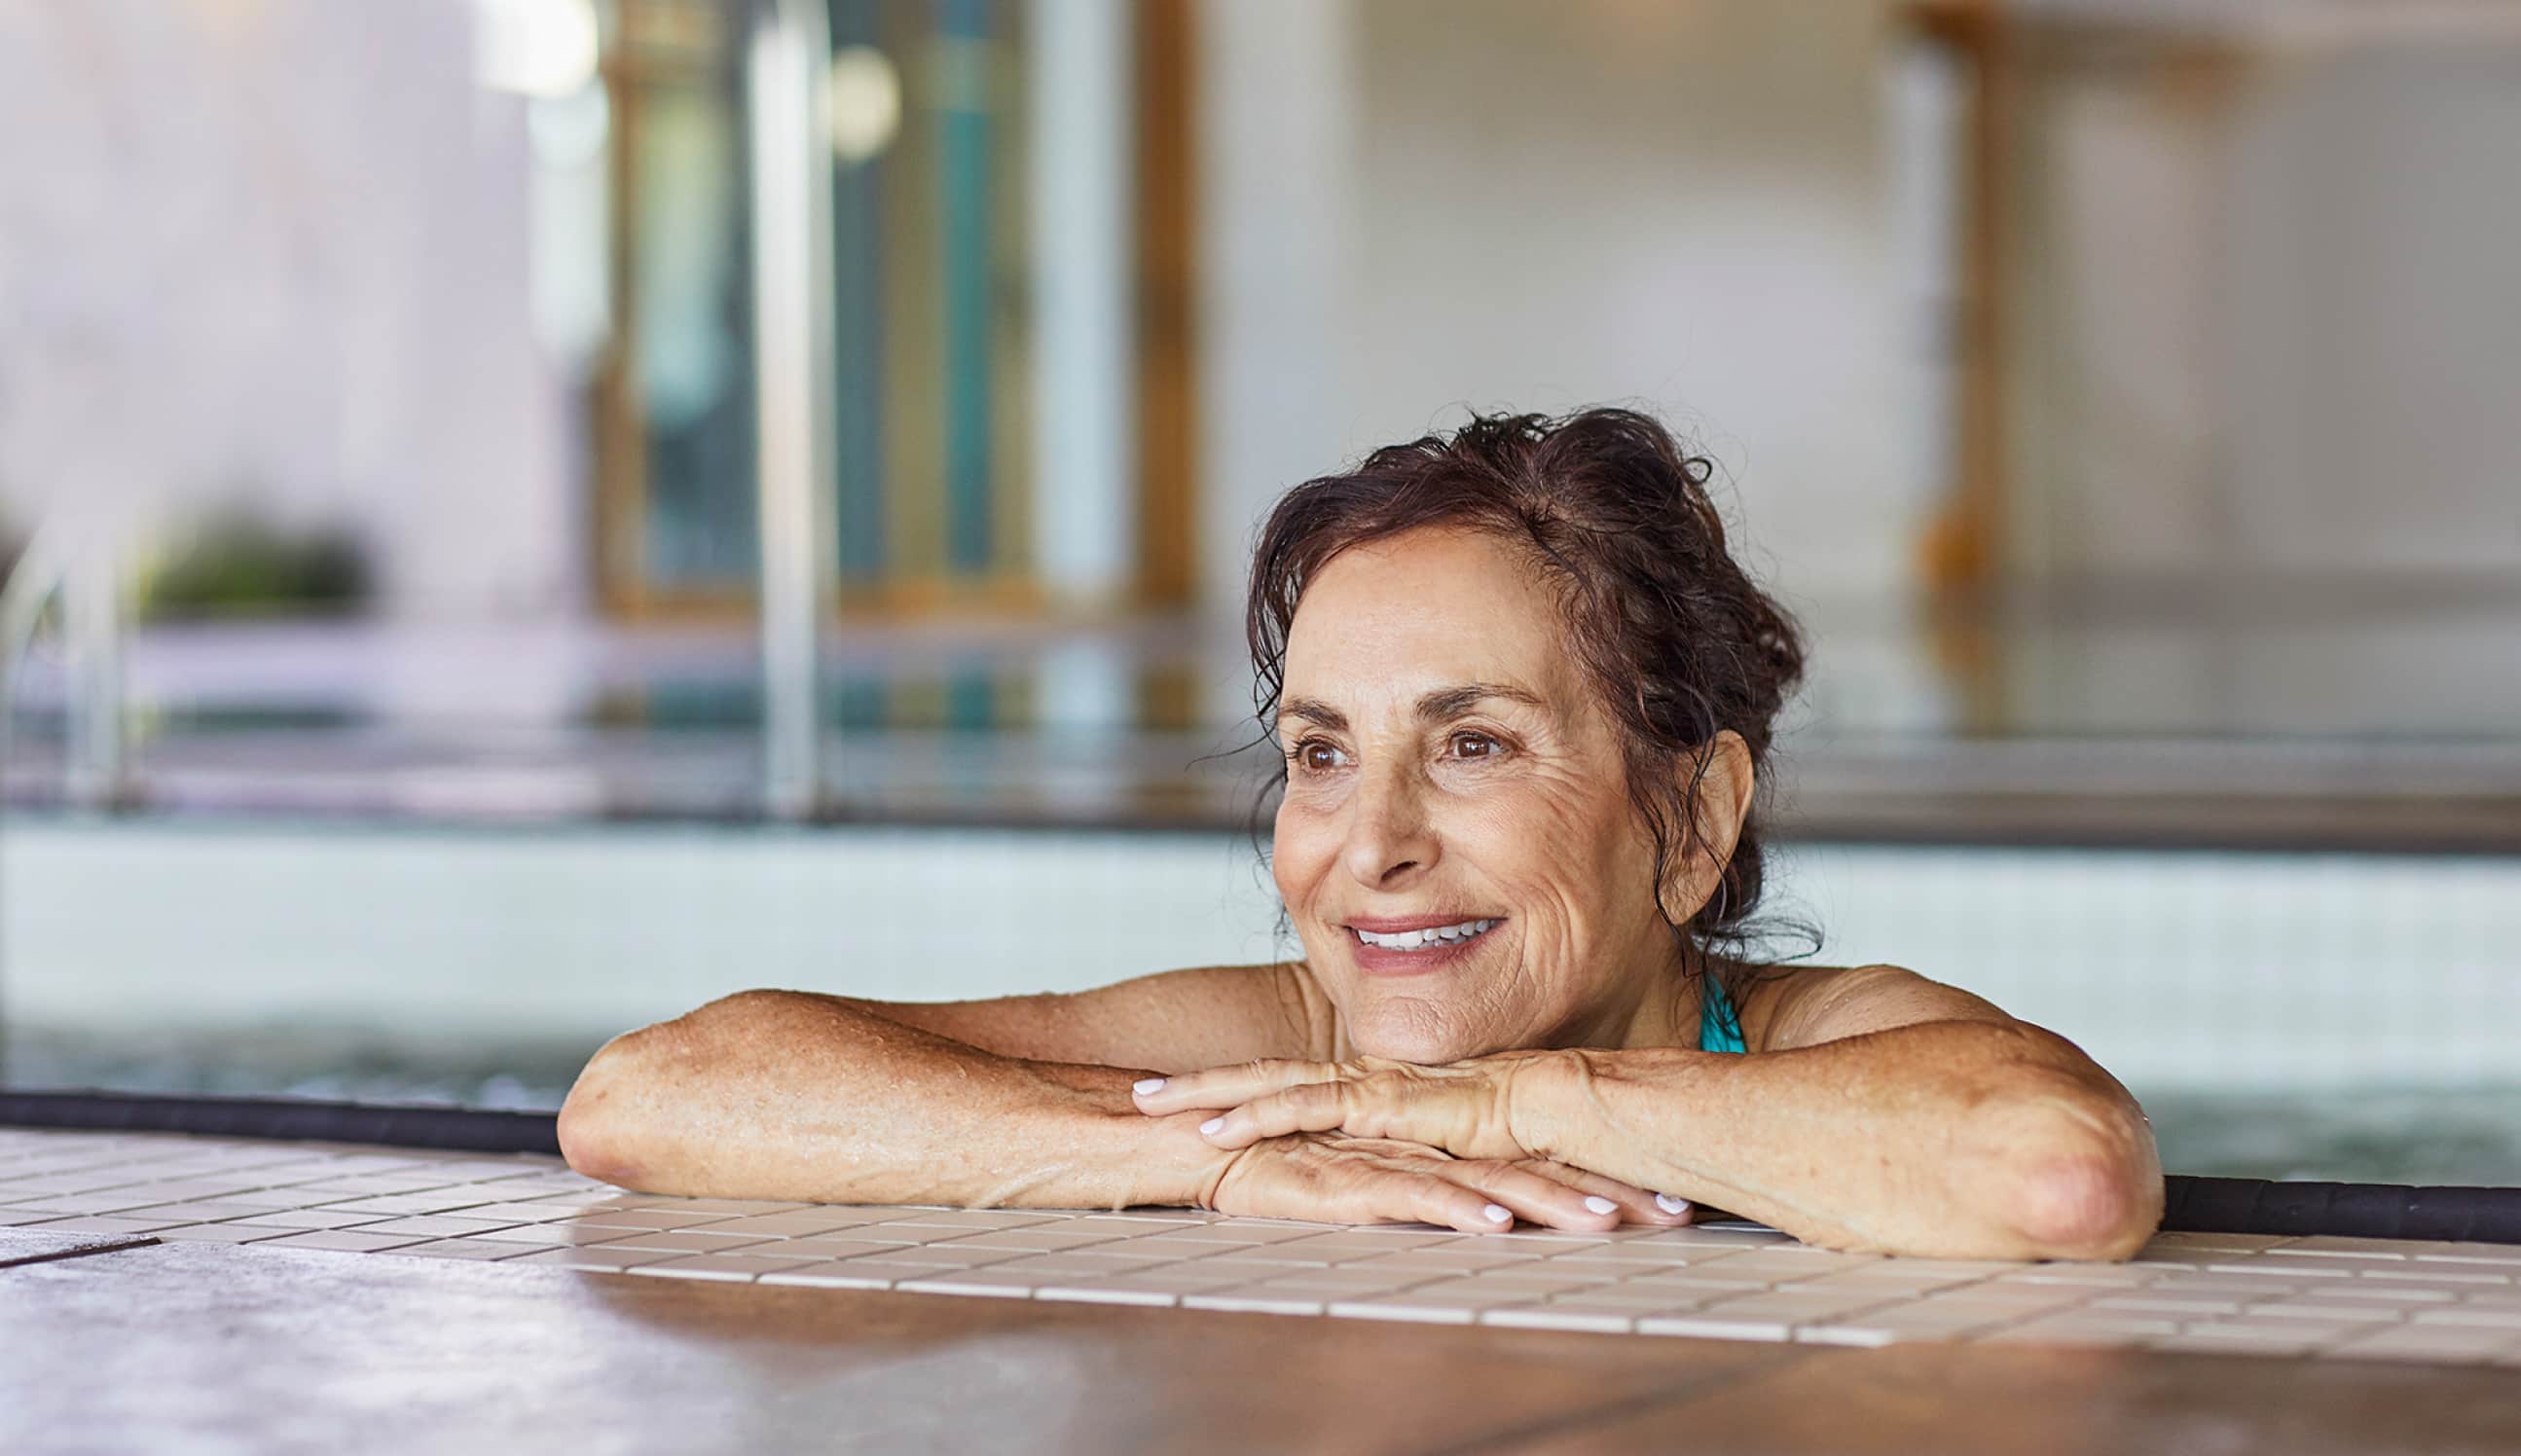 A senior woman with a content smile relaxing at the edge of an indoor swimming pool, suggesting an active and enjoyable retirement lifestyle.